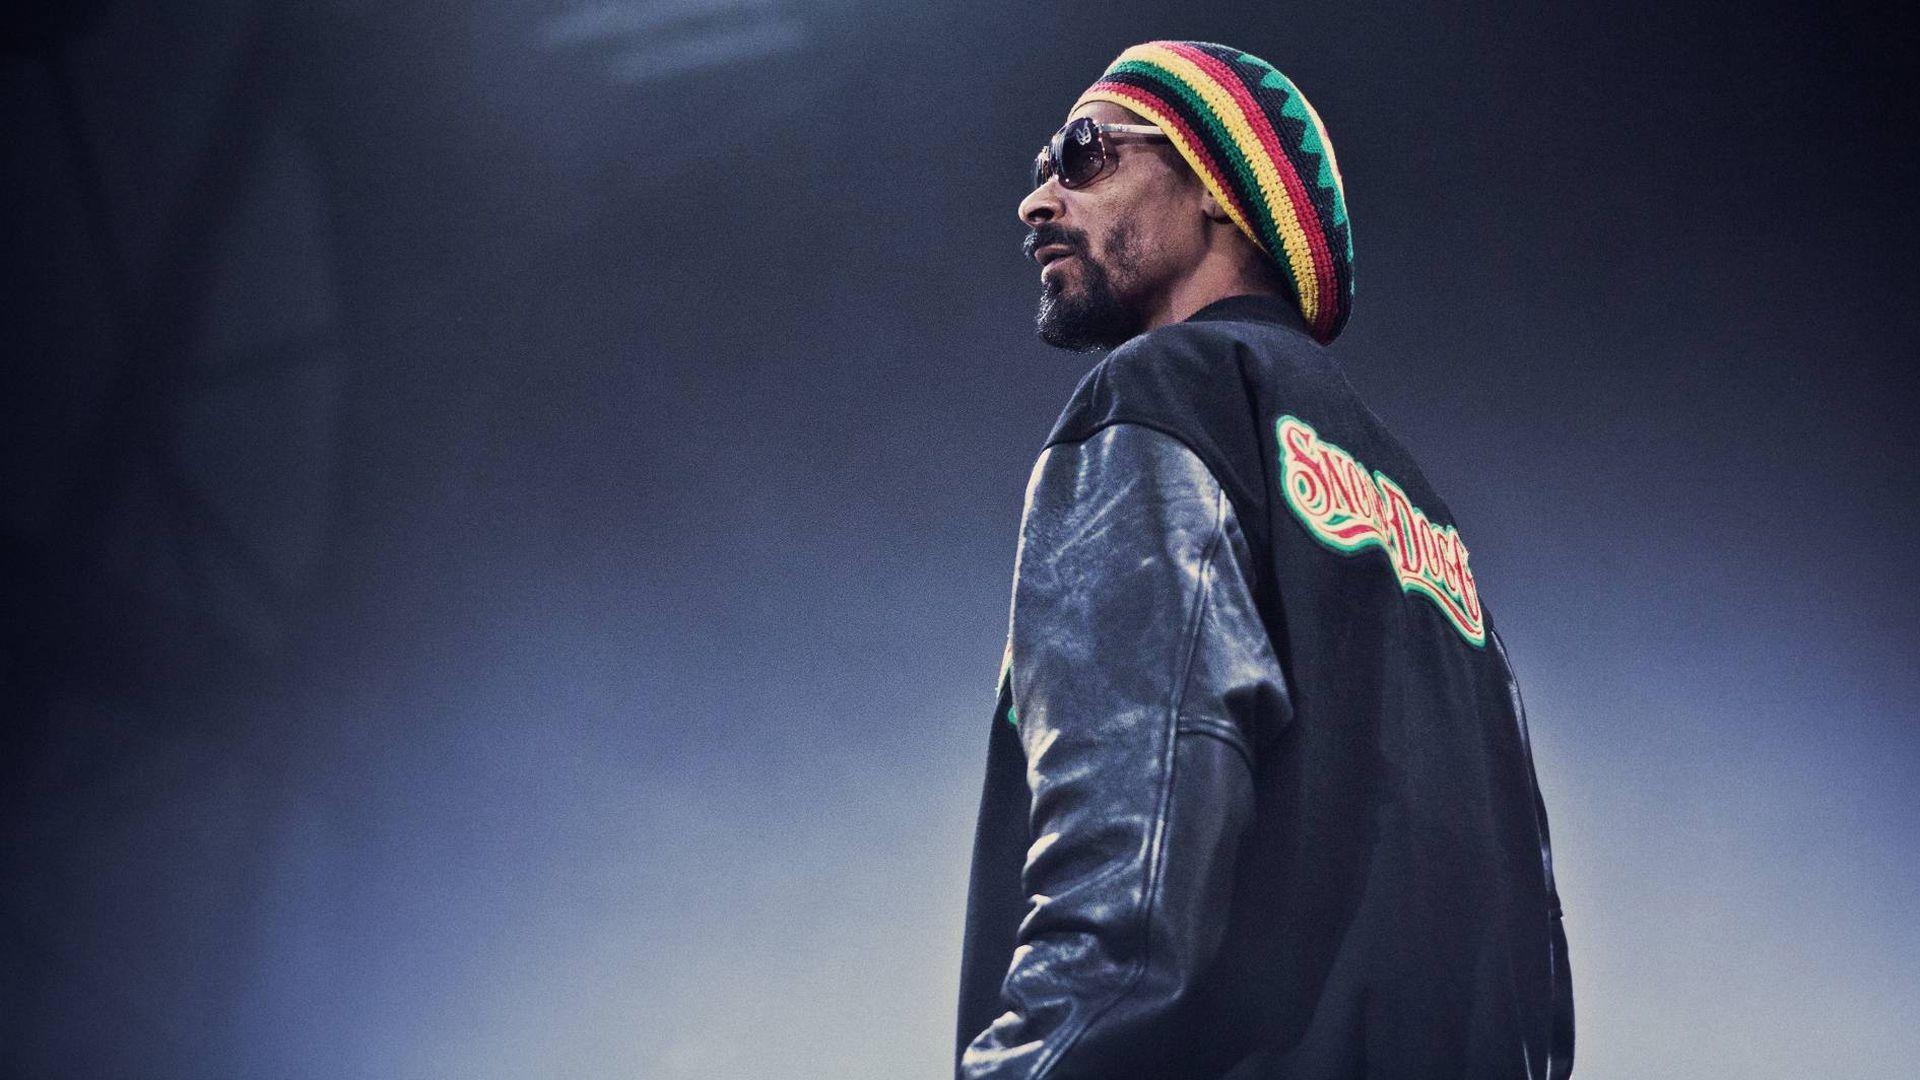 Images: Snoop Dogg